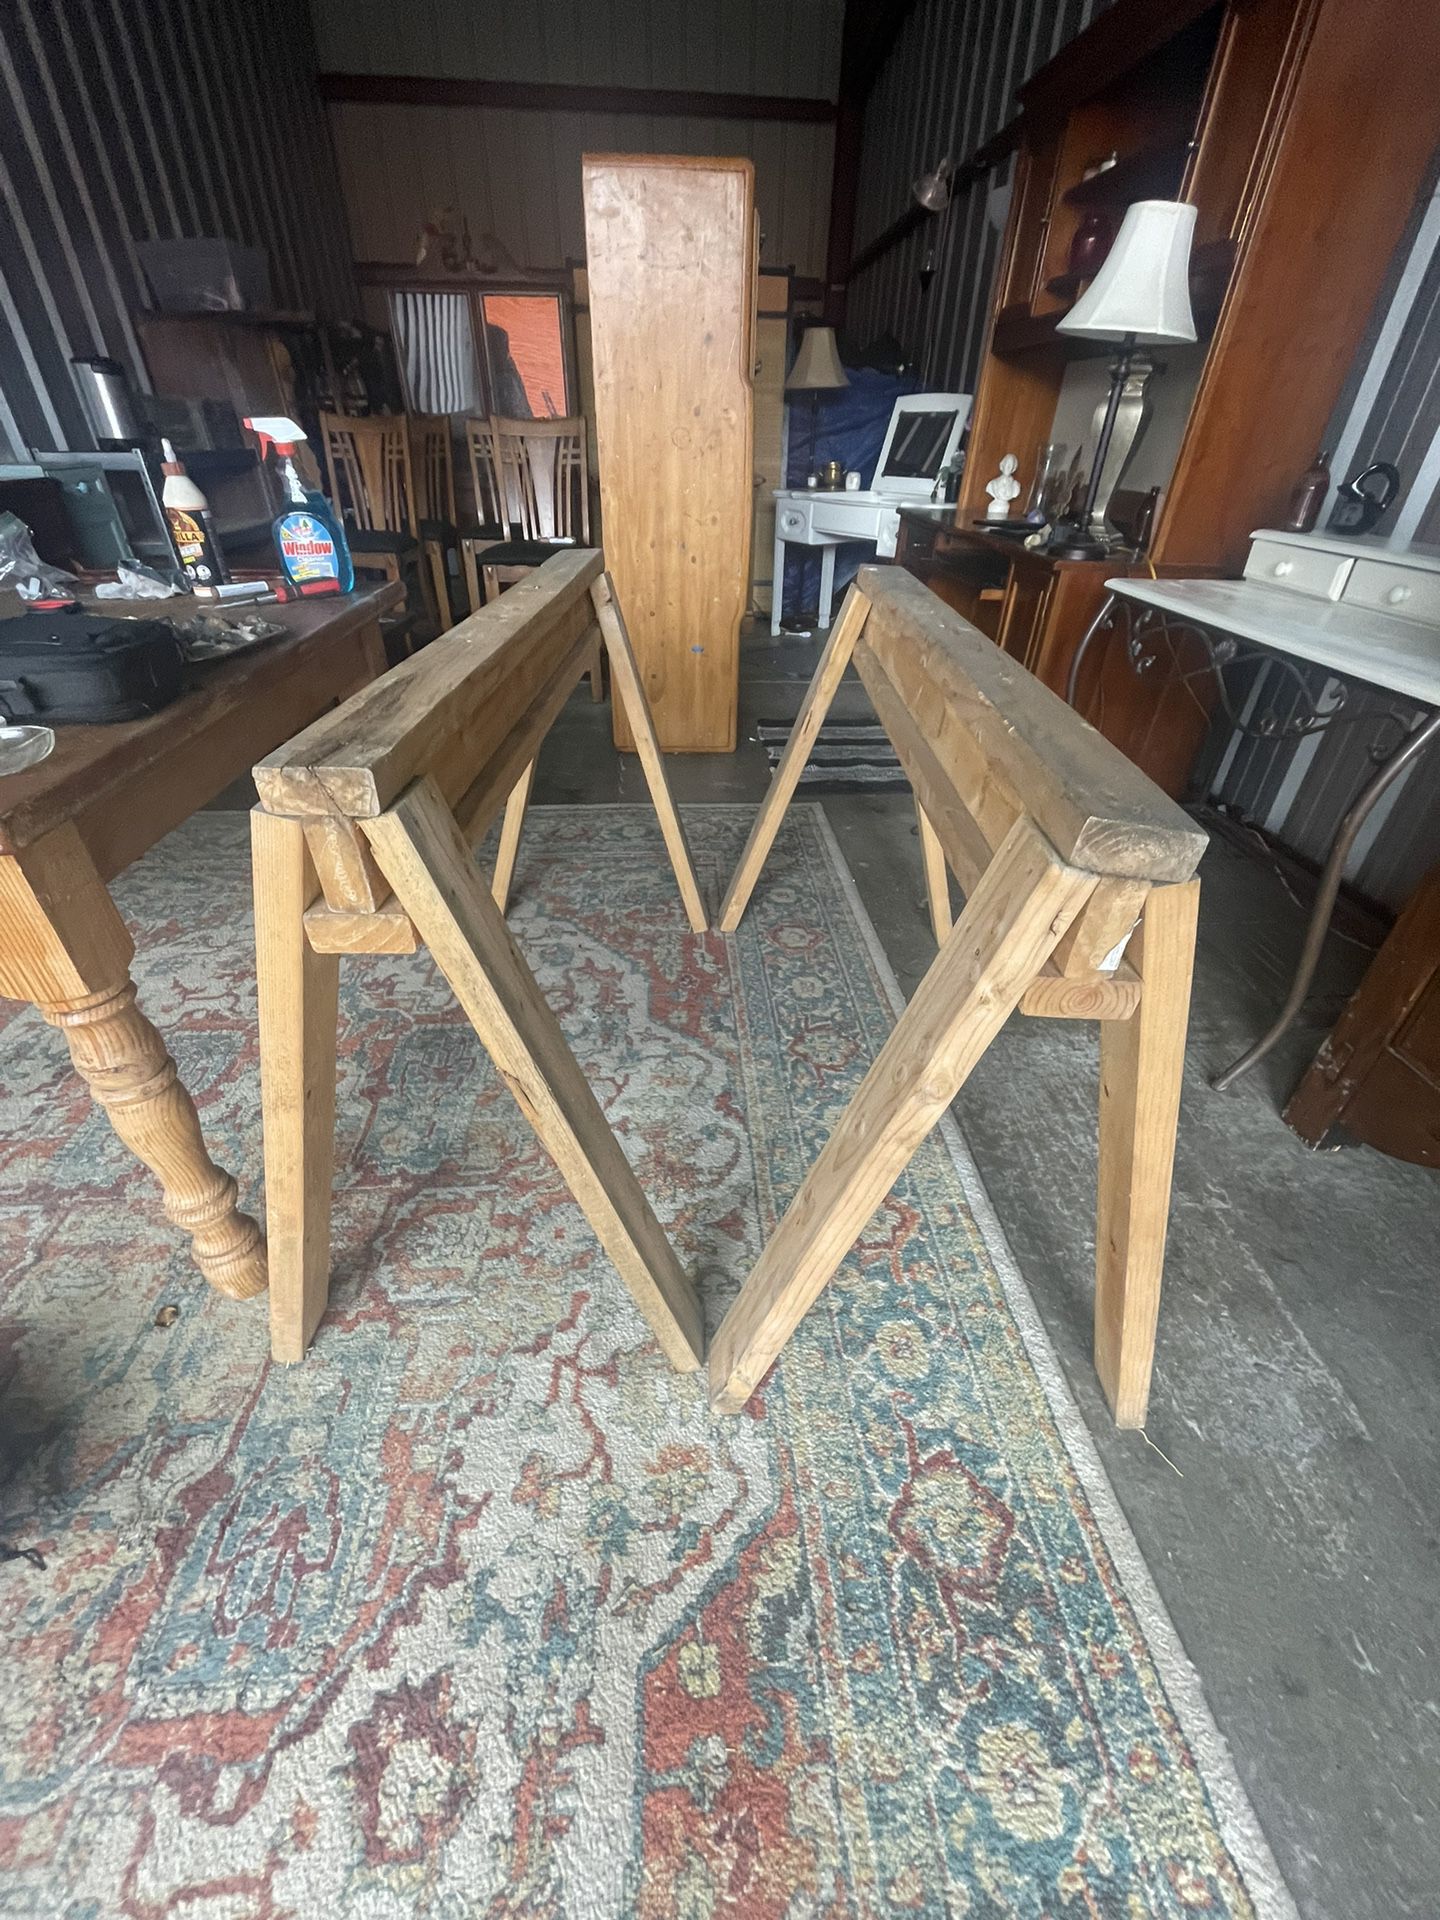 2 Wooden Saw Horses $40